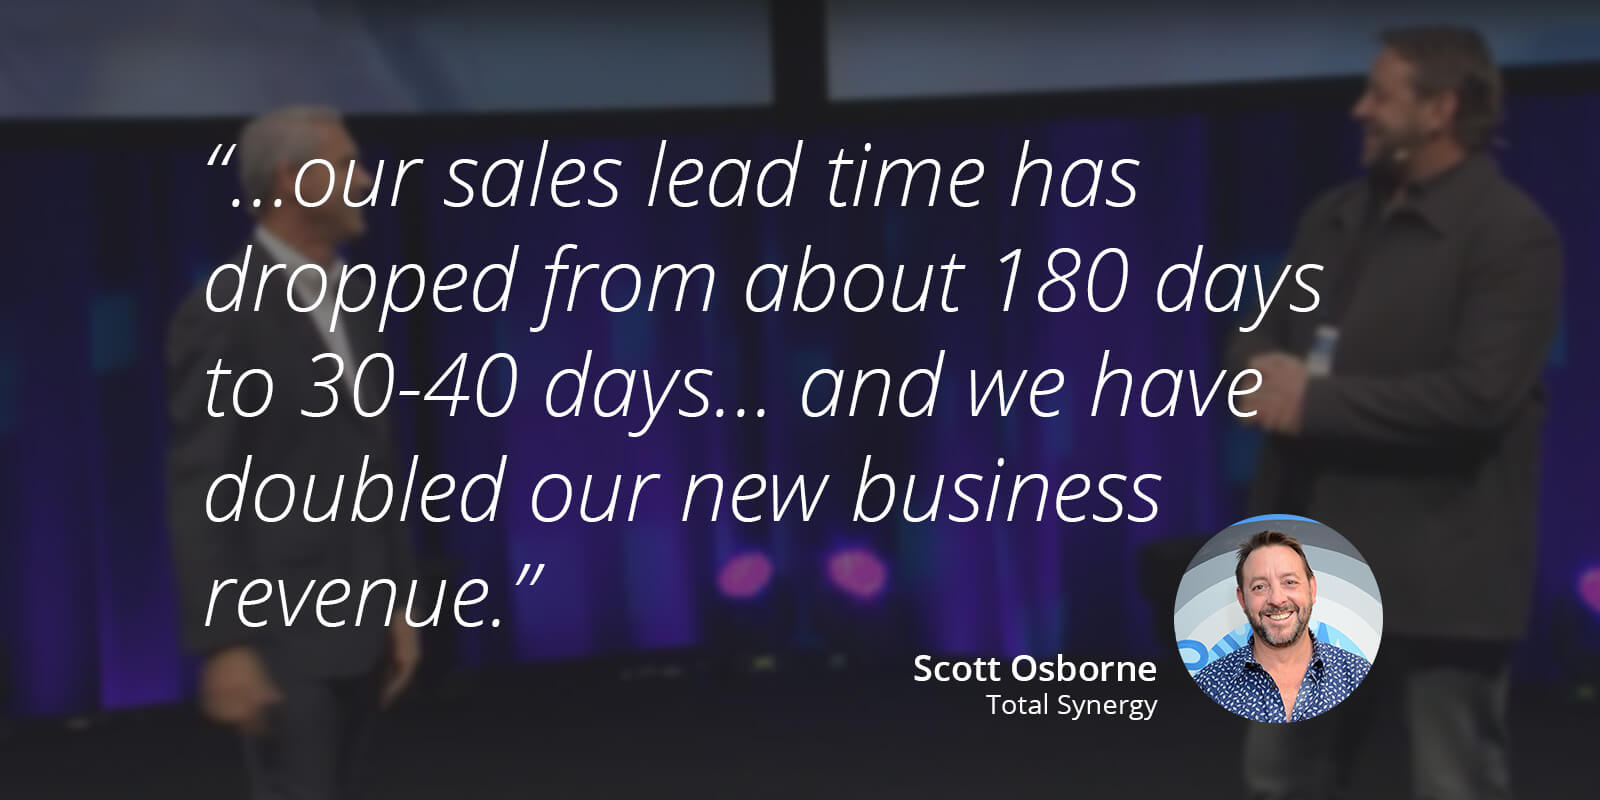 Microsoft interviews Total Synergy CEO Scott Osborne about the success the company has experienced from its shift to digital marketing.